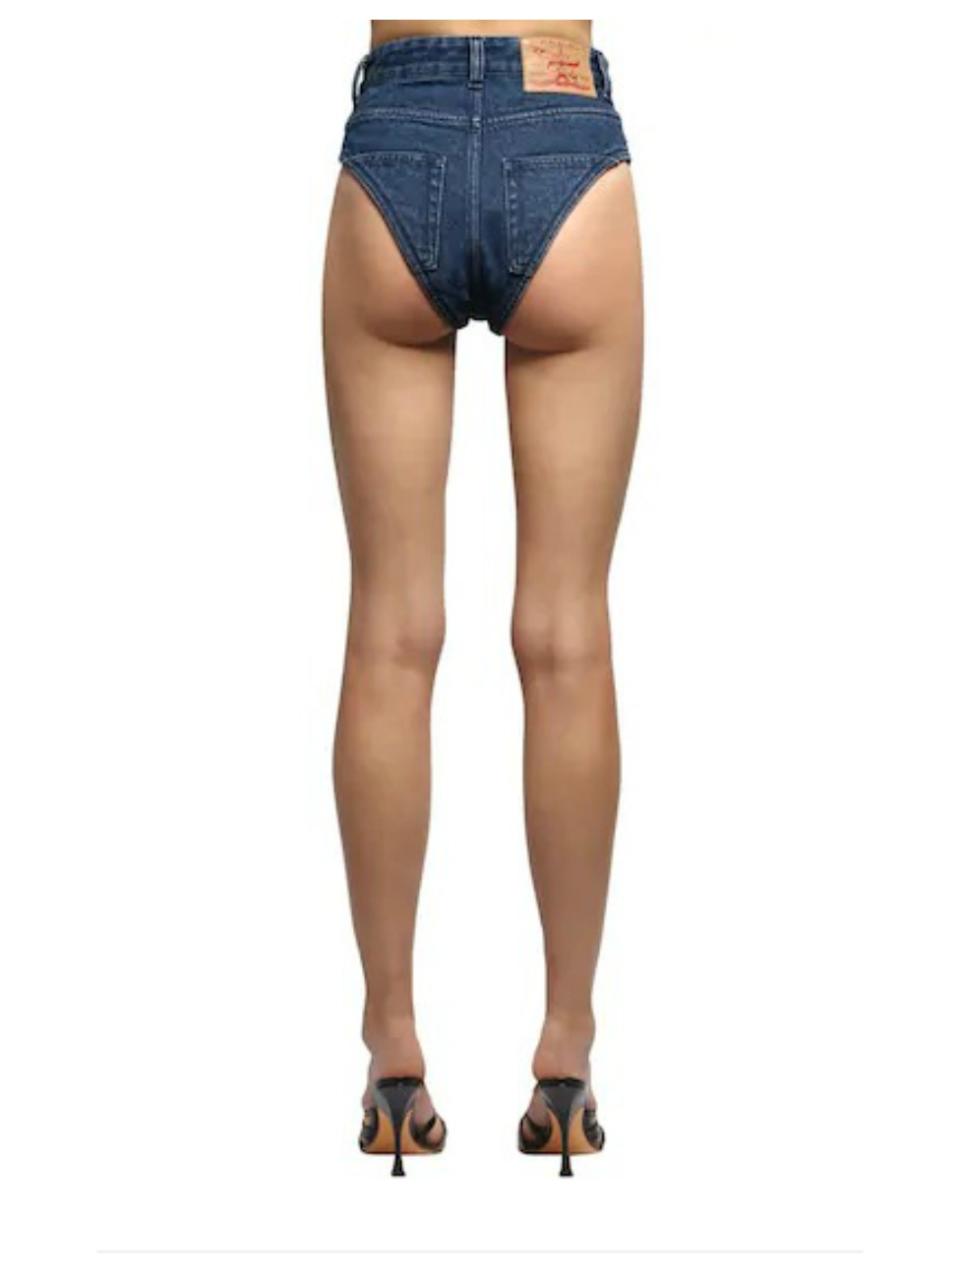 Some users have compared the shorts to a nappy. Photo: Y Project